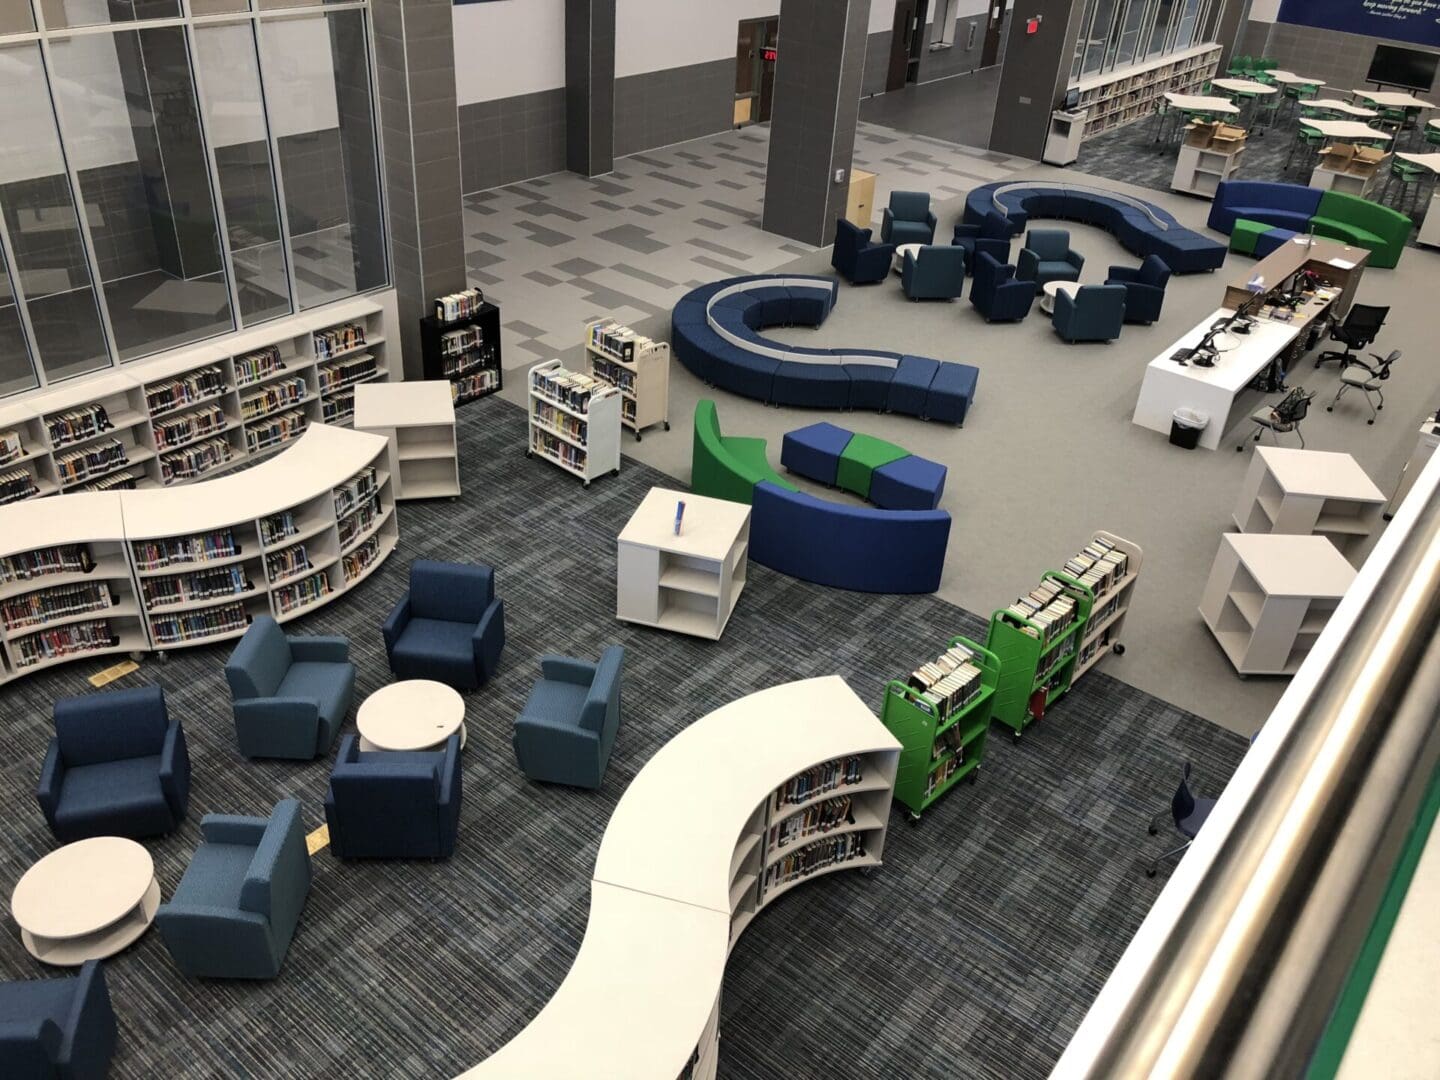 A library with many blue and green chairs.